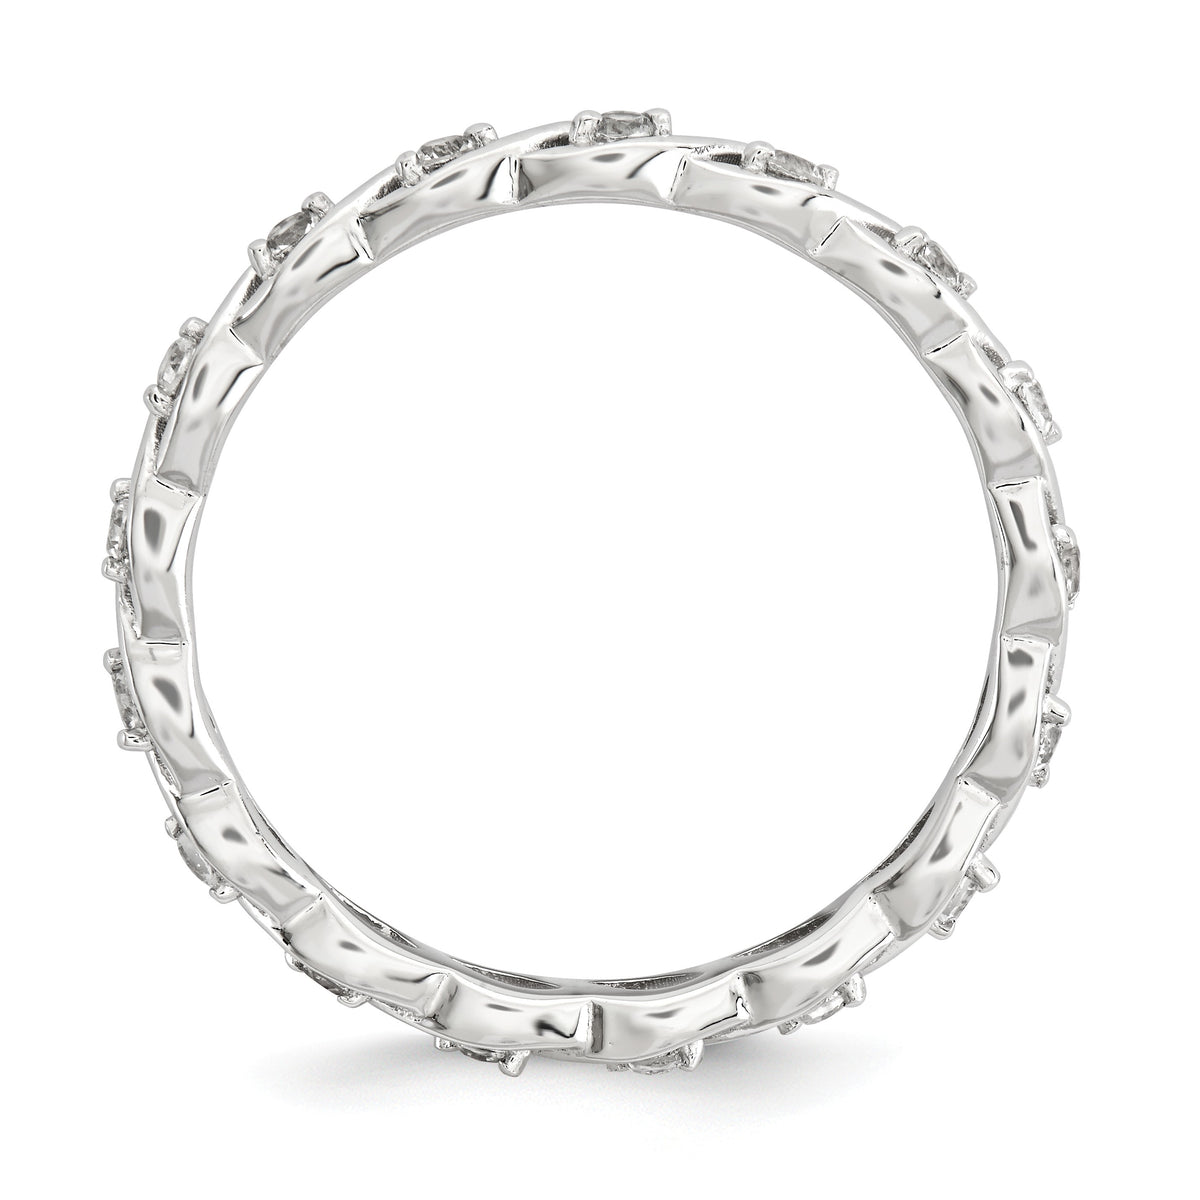 Alternate view of the 2.5mm Rhodium Plated Sterling Silver Stackable White Topaz Twist Band by The Black Bow Jewelry Co.